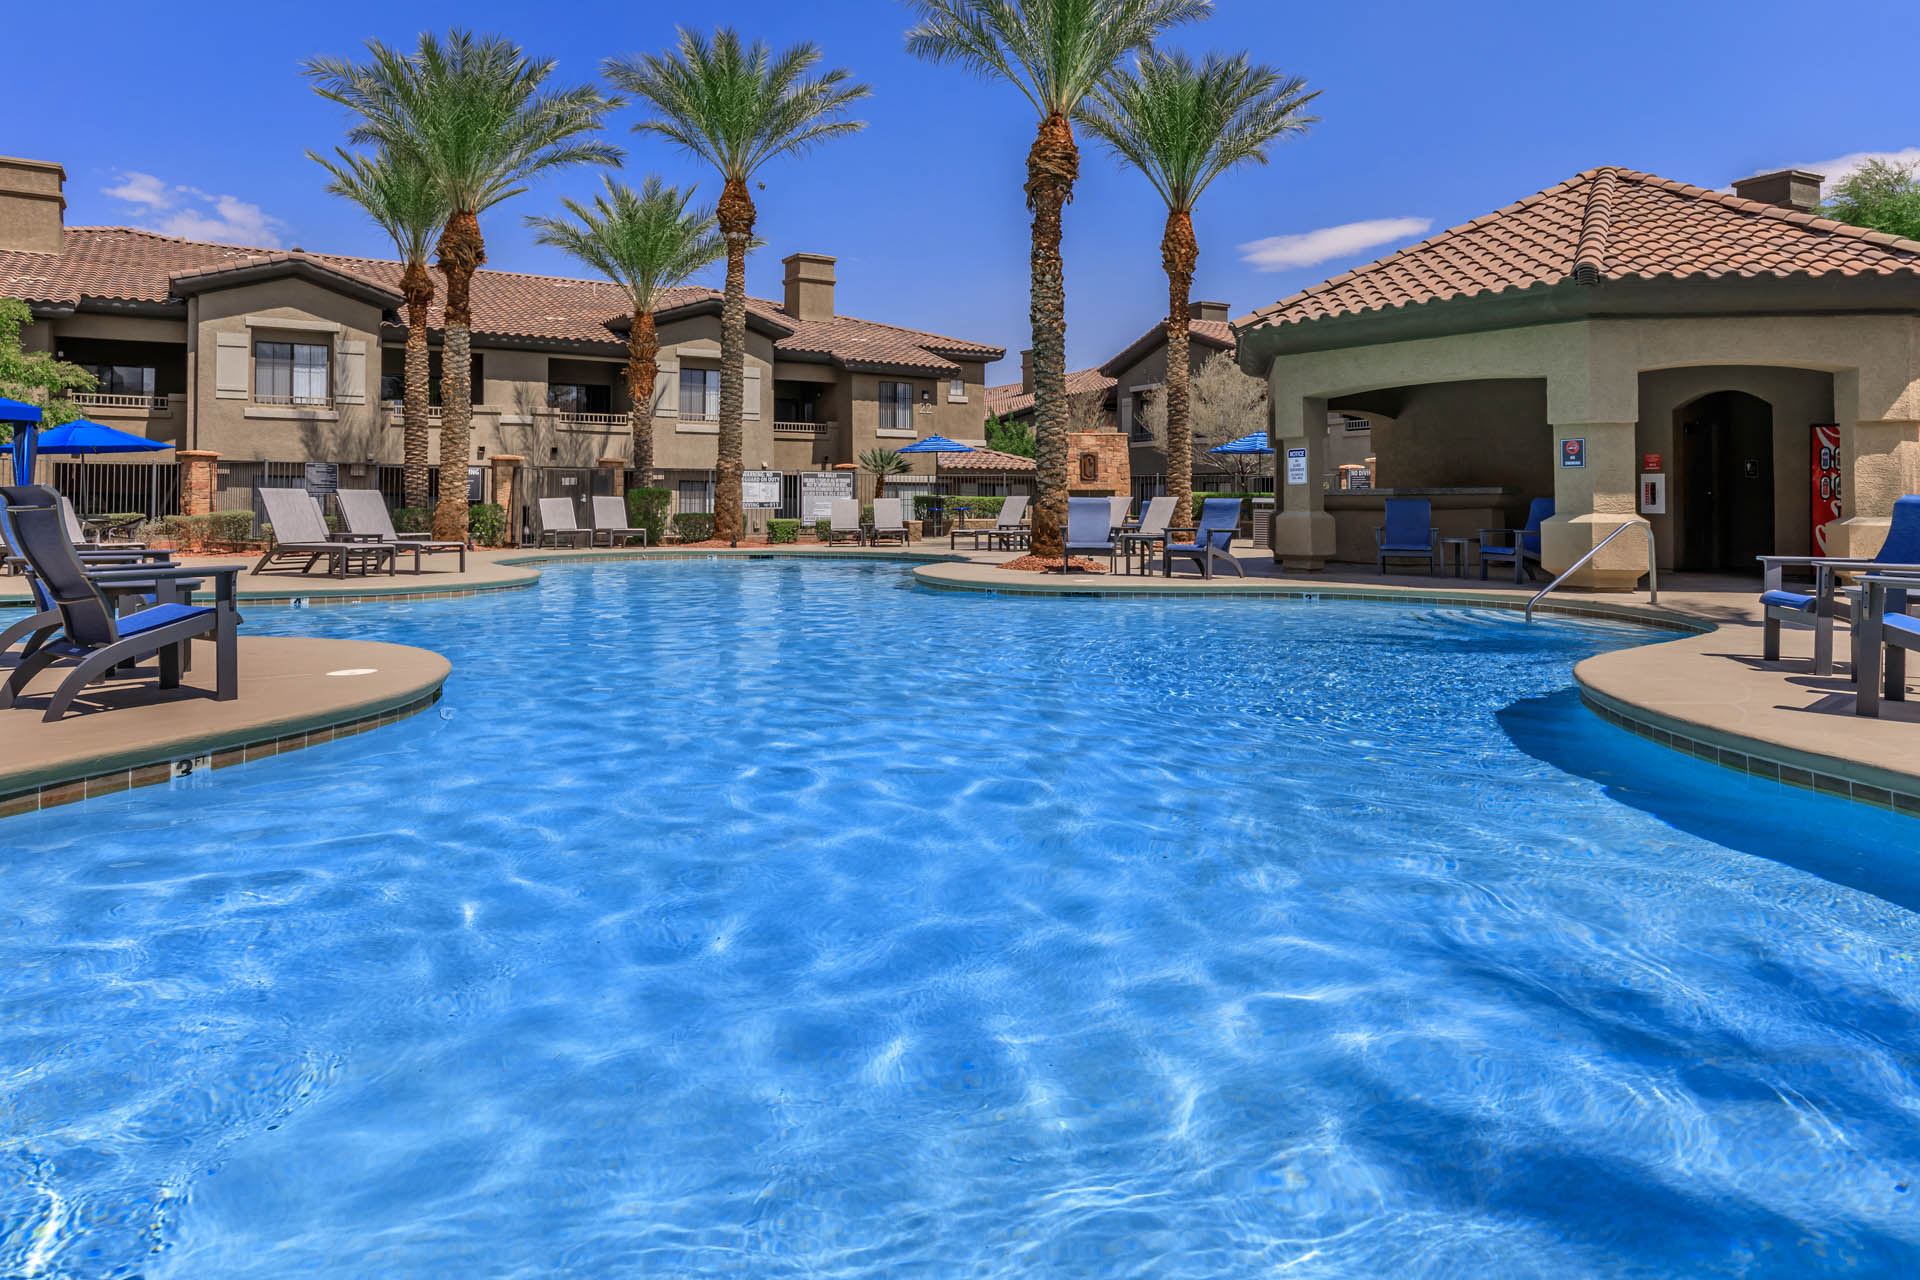 Swimming at The Cantera by Picerne, Las Vegas, NV, 89139